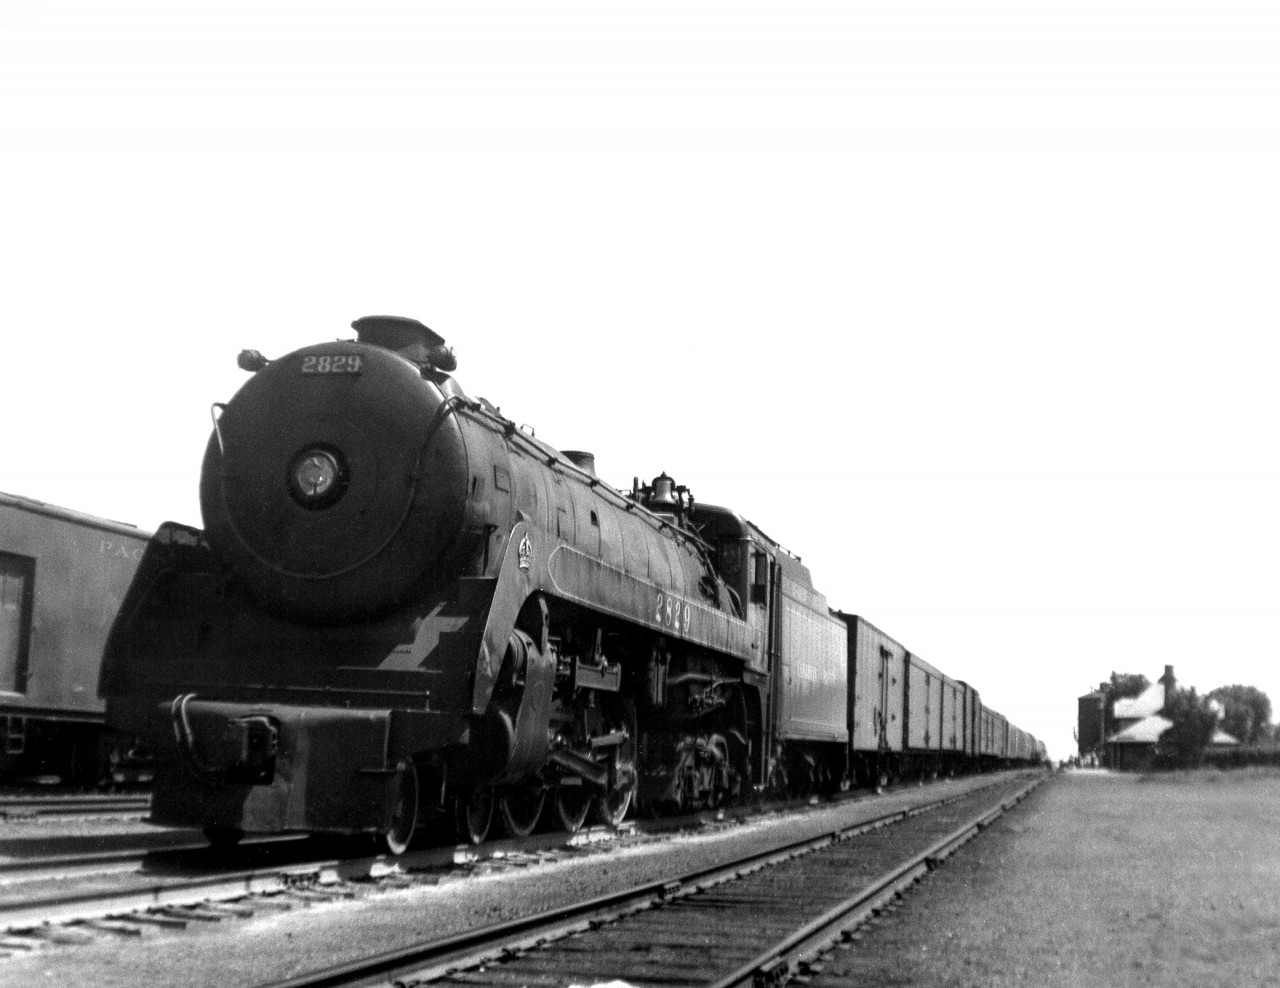 Royal Hudson 2829 on train 5, the mail and Express, which ran as a section of the "Dominion" pauses at Virden before entering single track.